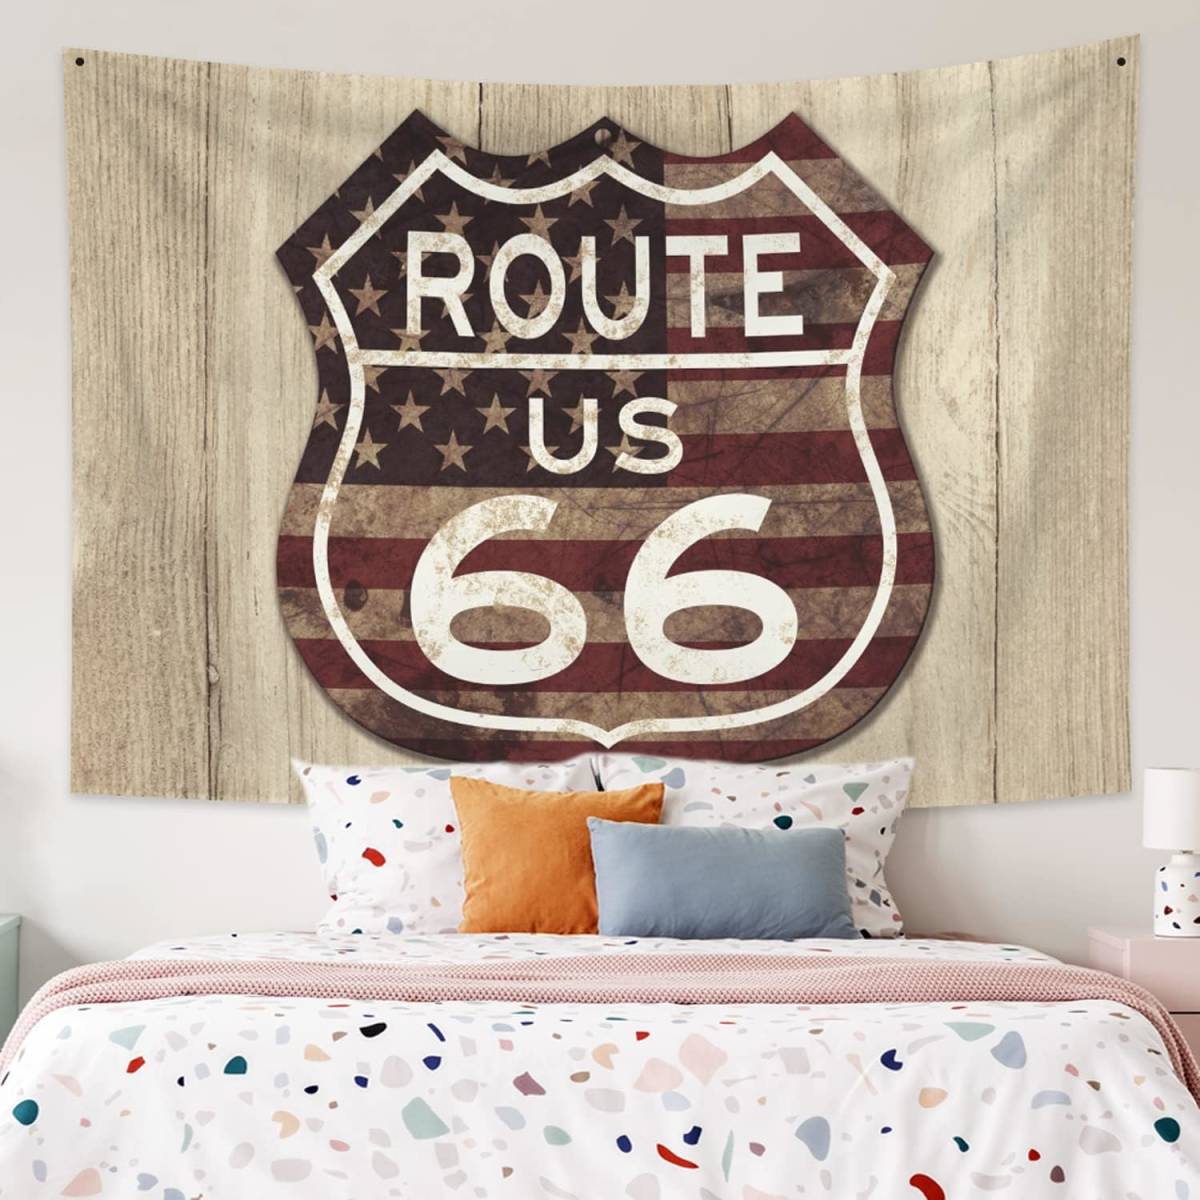  tapestry ROUE66 Vintage wood grain Old american stylish interior circle wash possibility american miscellaneous goods presence eminent atmosphere making 